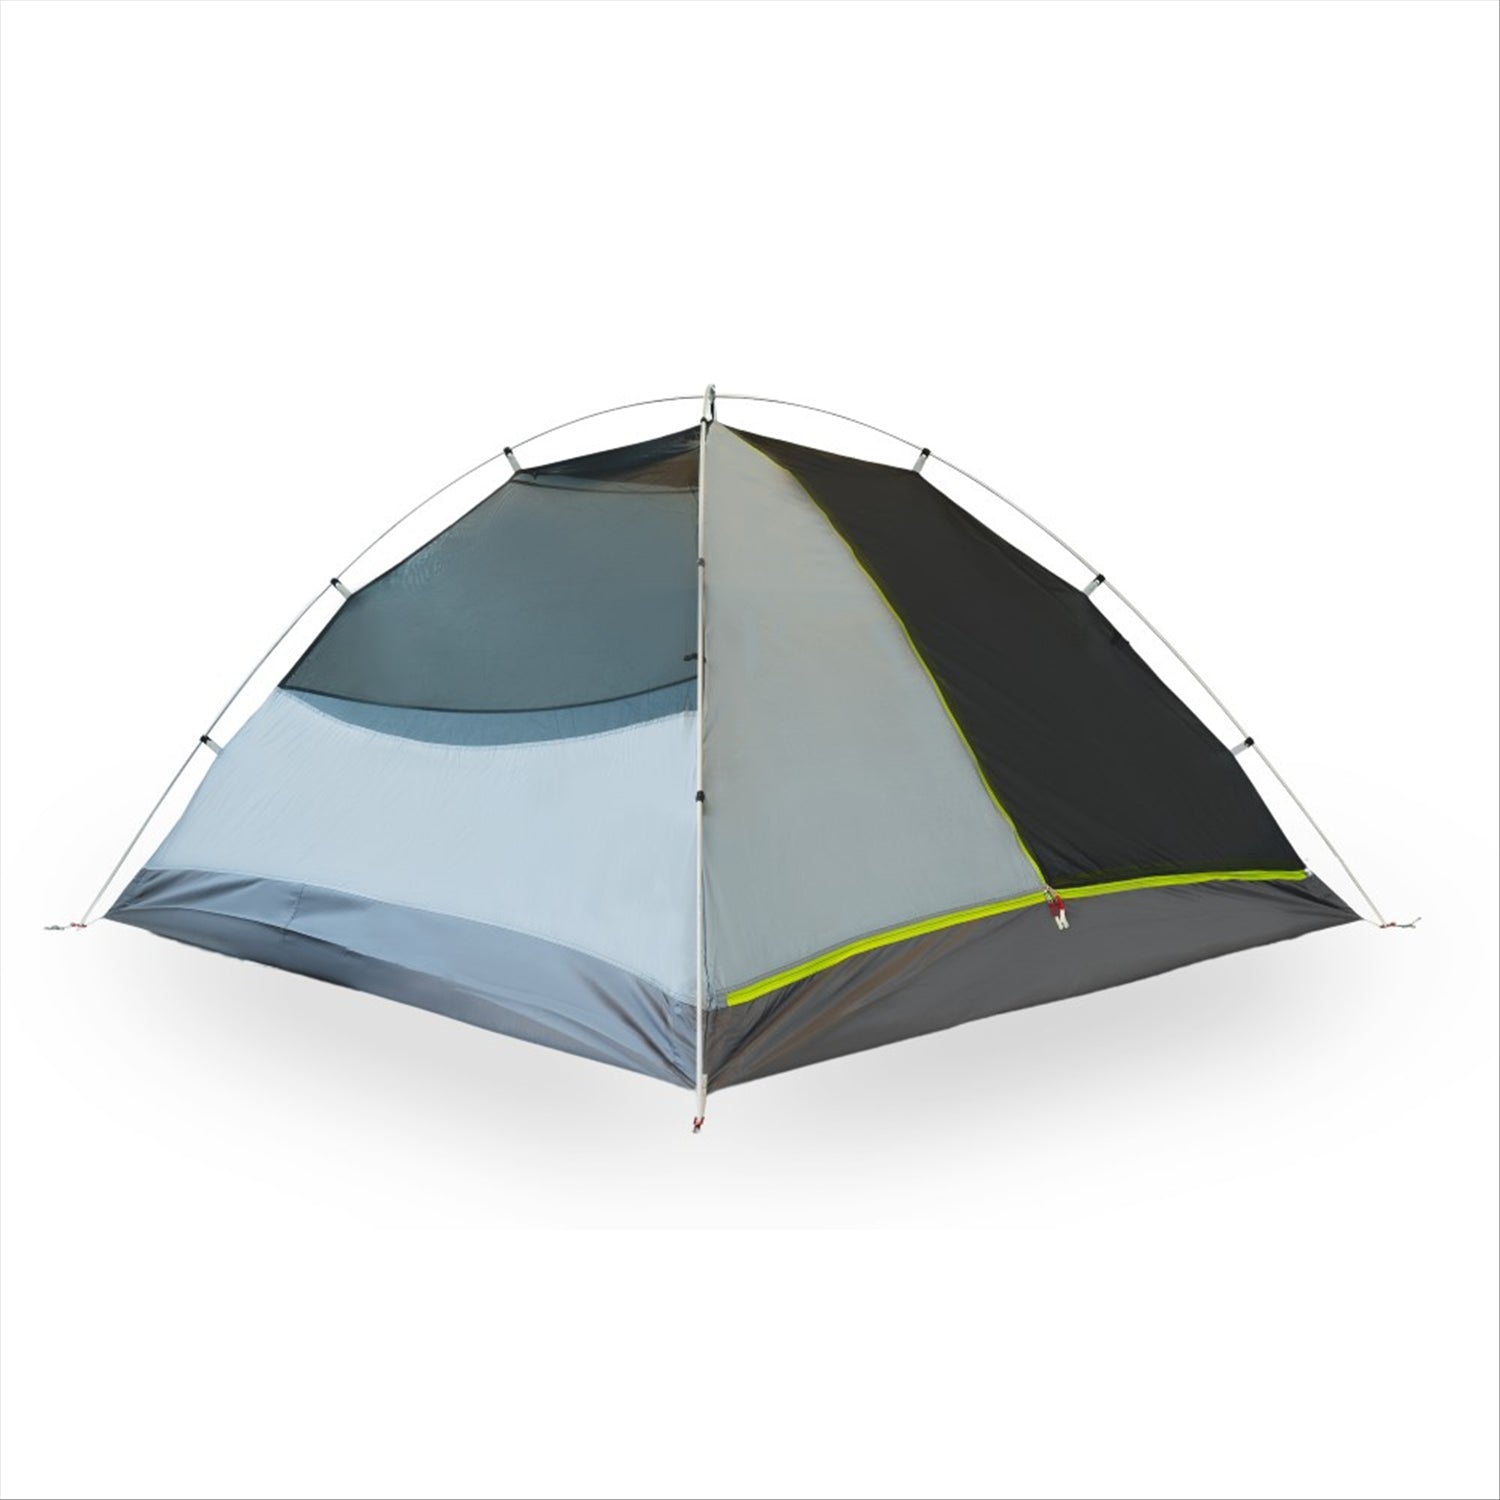 Orson Orson 3 'All Weather' Series 3-4 Person Tent, 3.3kg